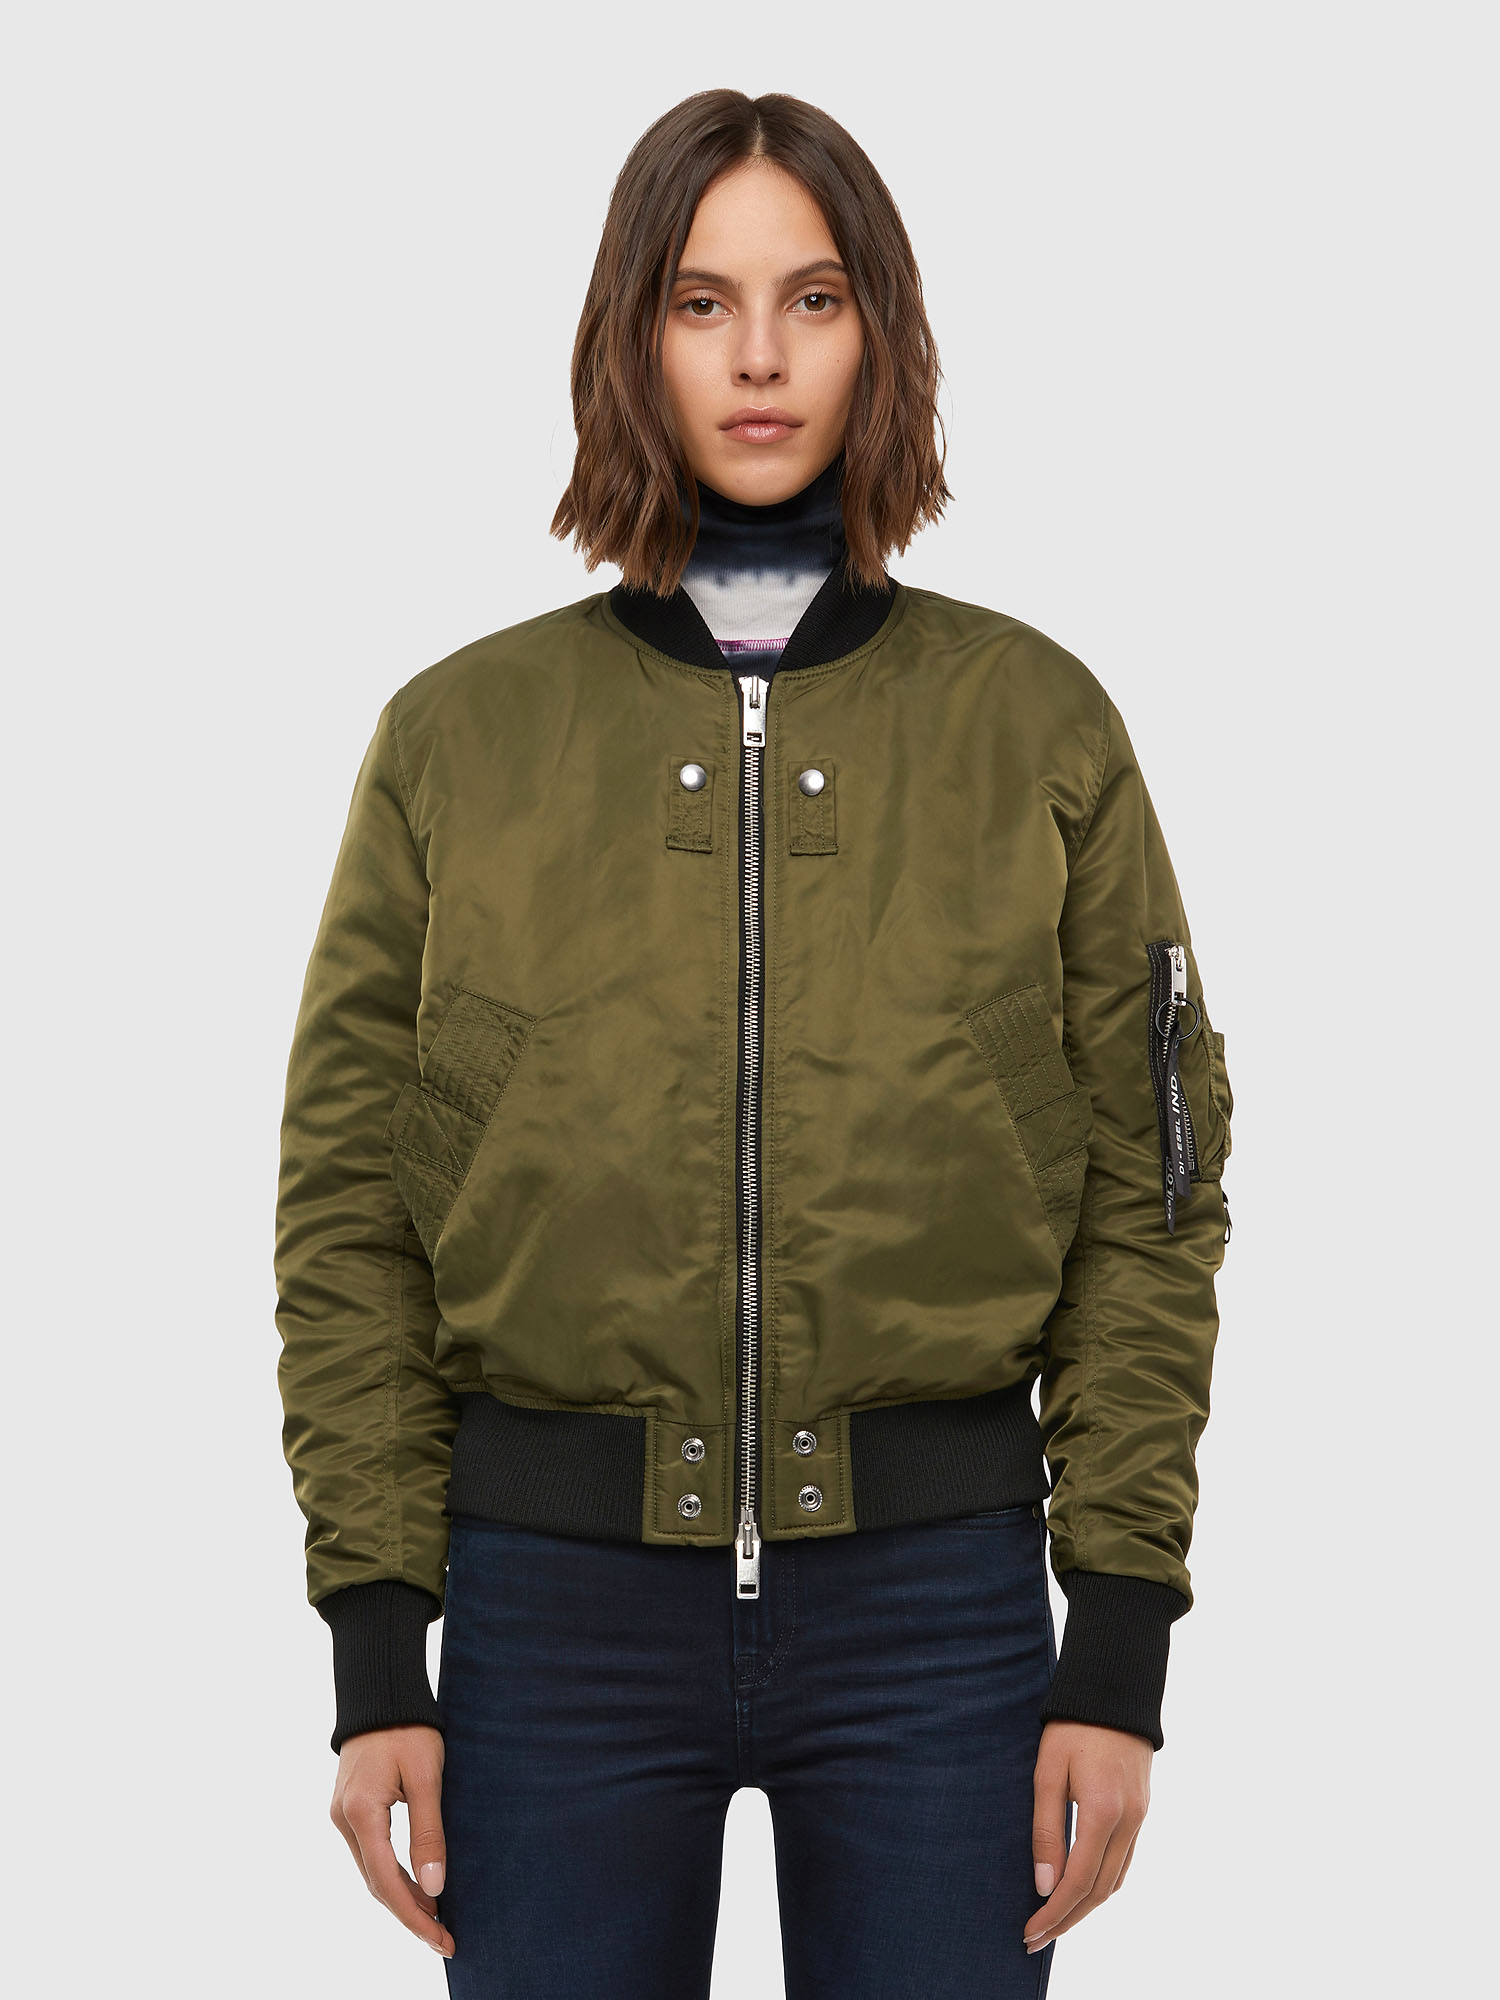 W-SWING Woman: Padded bomber jacket with lace-up detail | Diesel